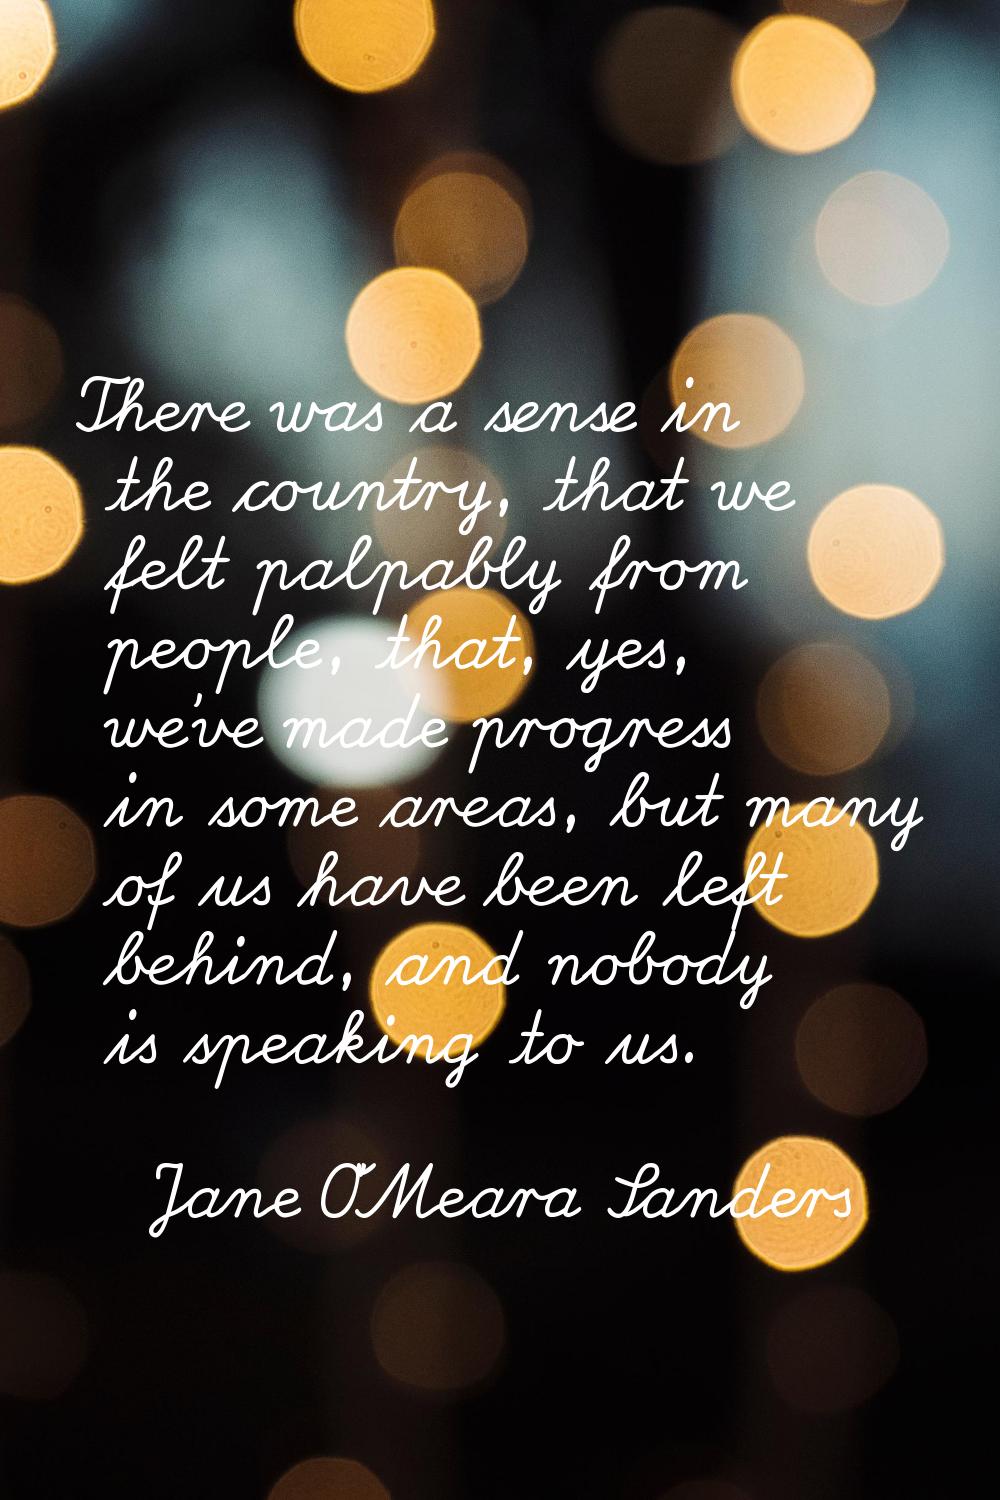 There was a sense in the country, that we felt palpably from people, that, yes, we've made progress